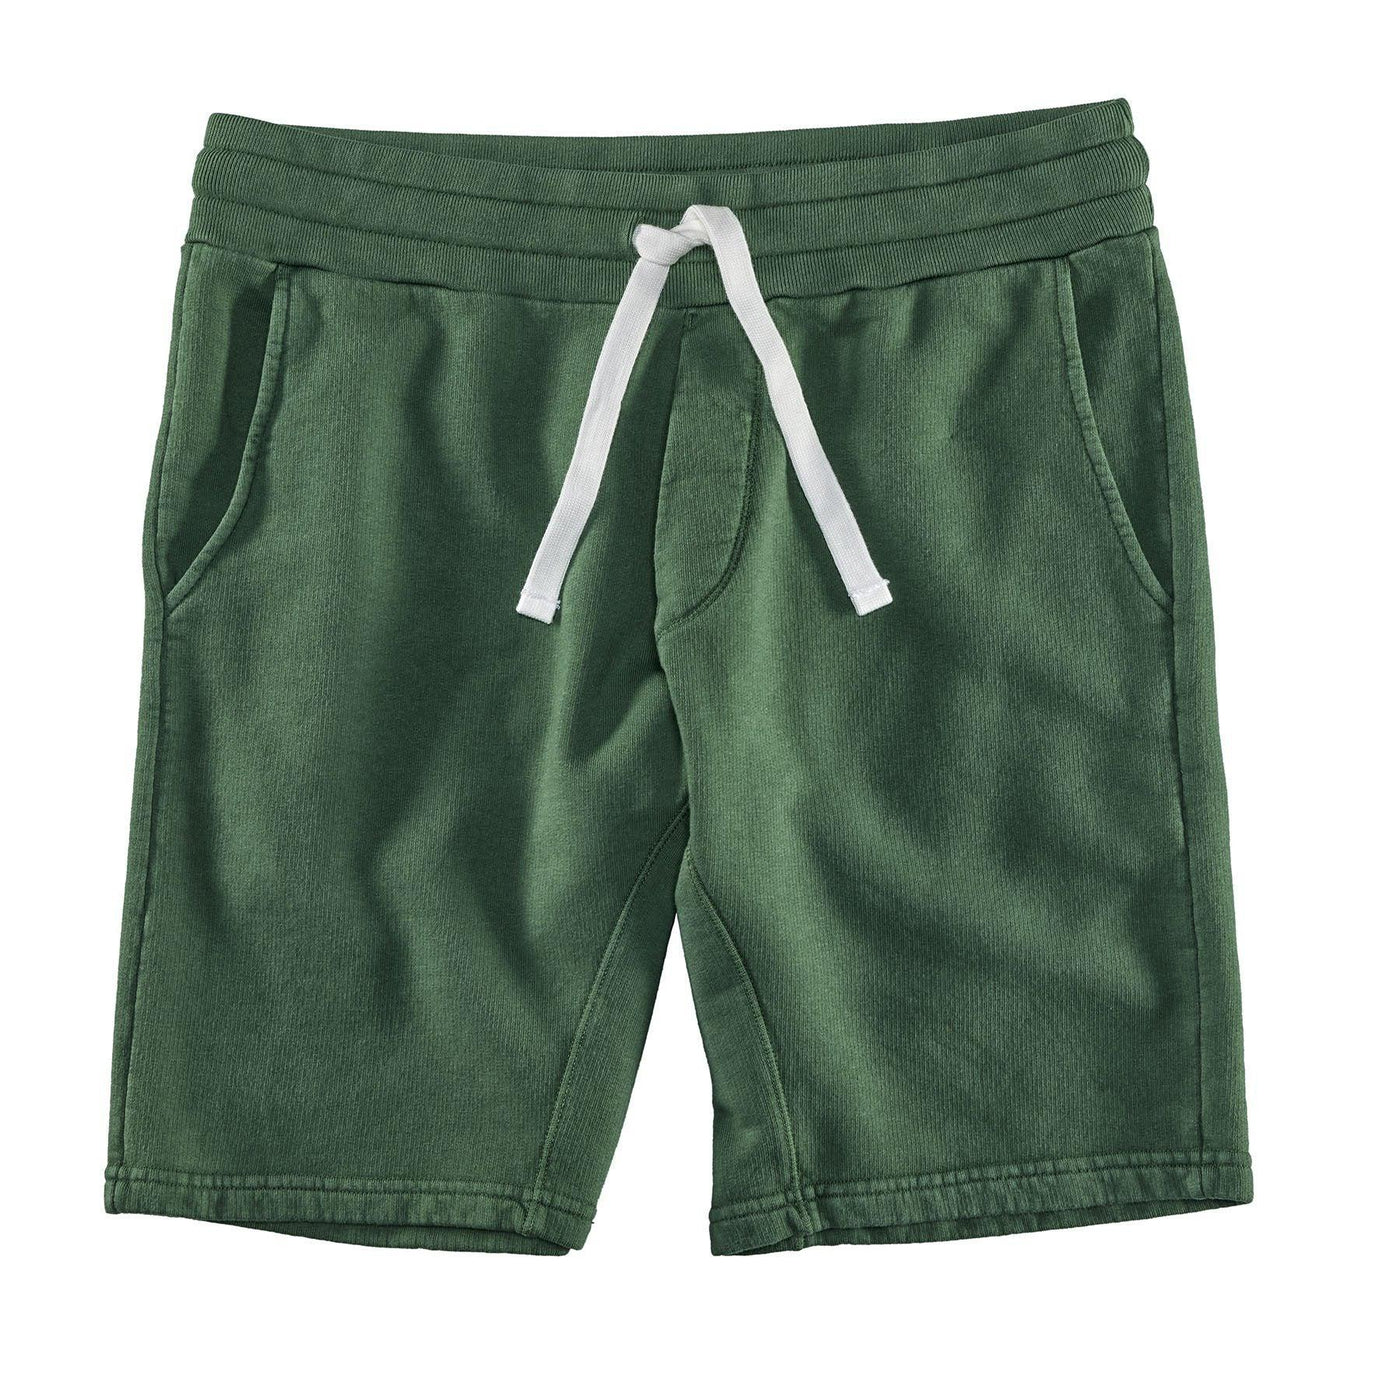 Bowery NYC Shorts Essential Green